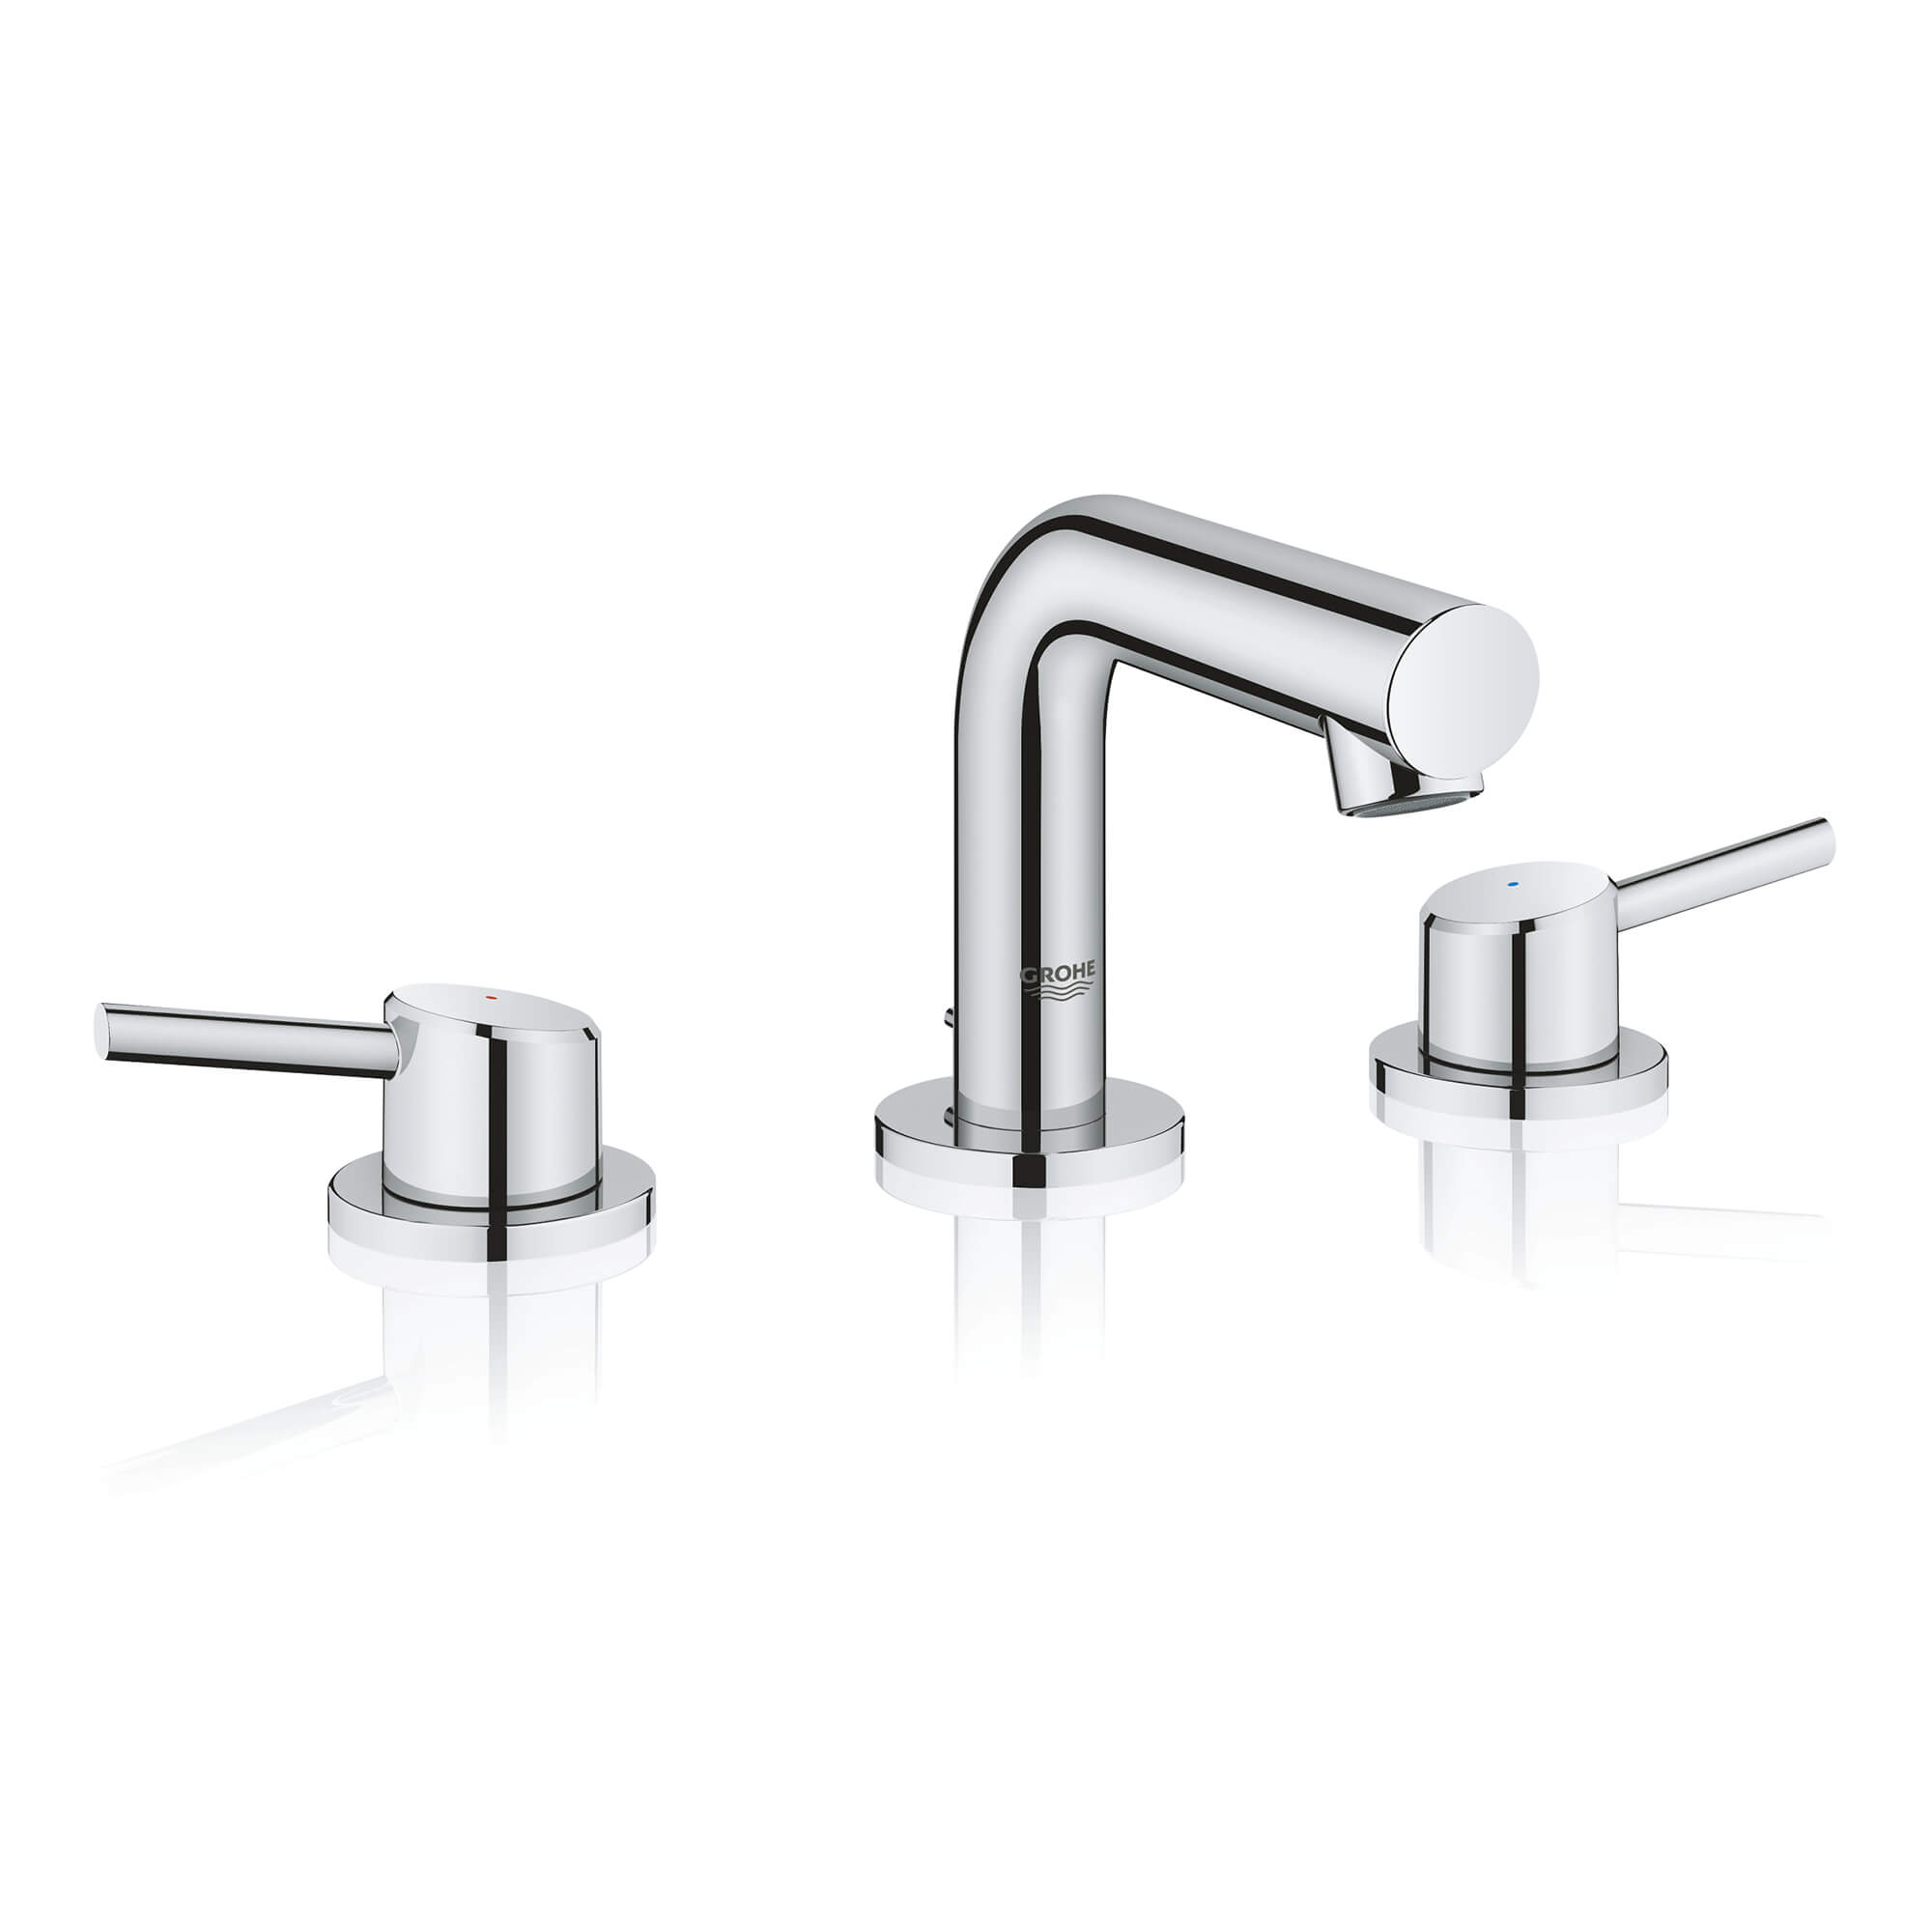 8-inch Widespread 2-Handle S-Size Bathroom Faucet, 1.2 GPM (4.5 L/min)